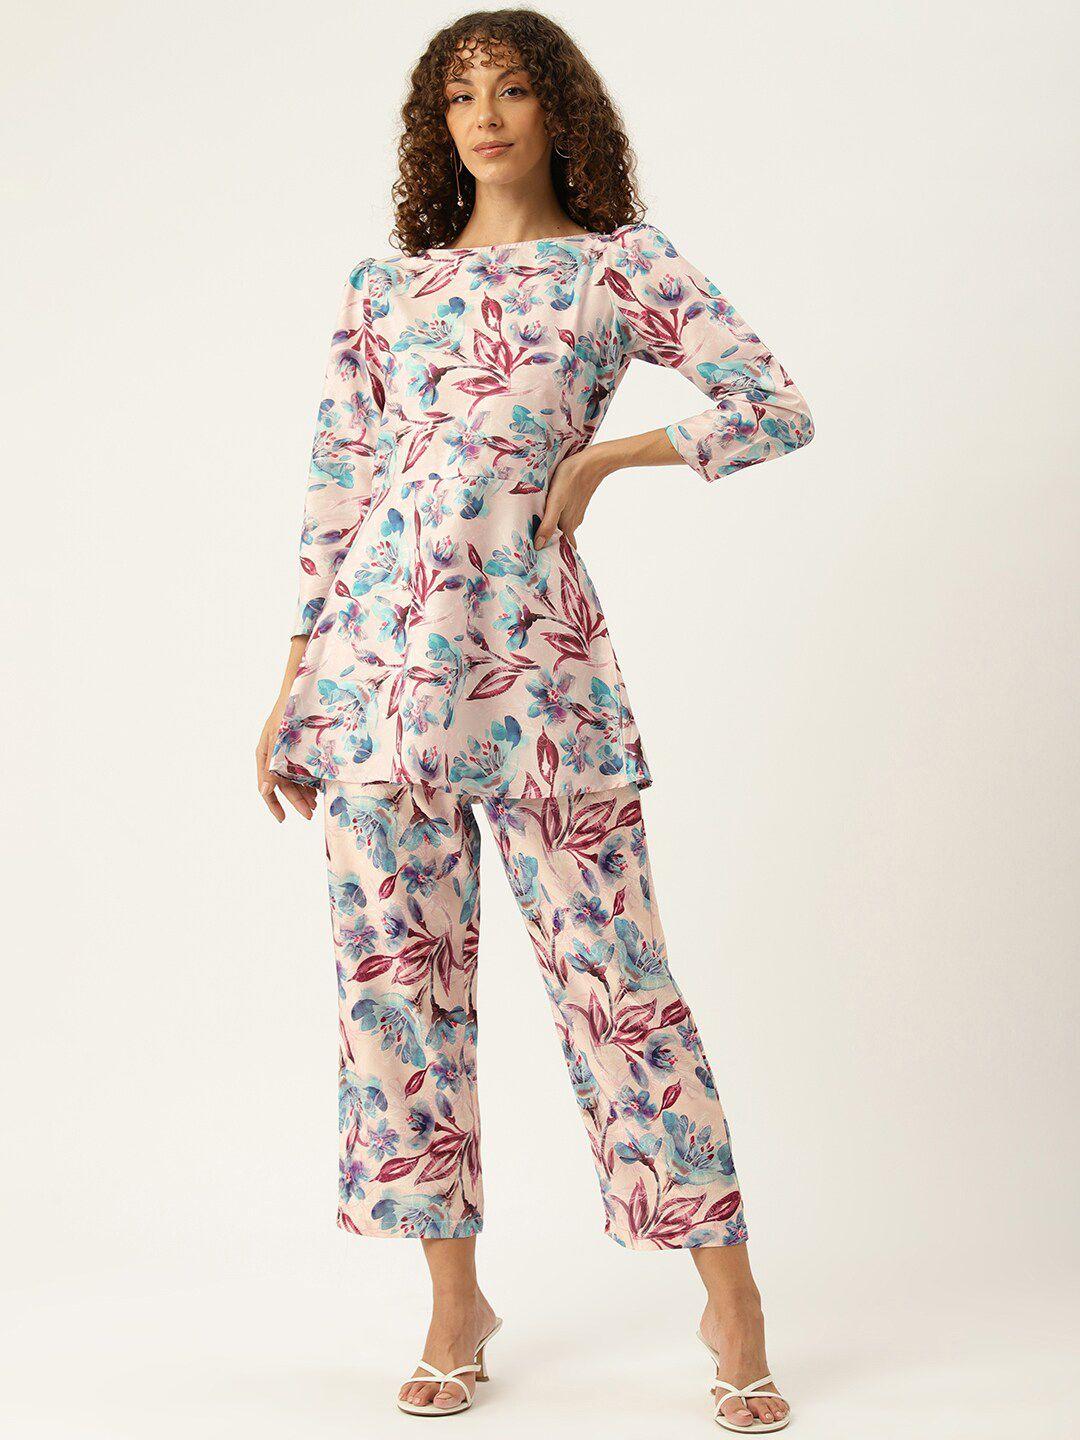 sleek italia floral printed top with trousers co-ords